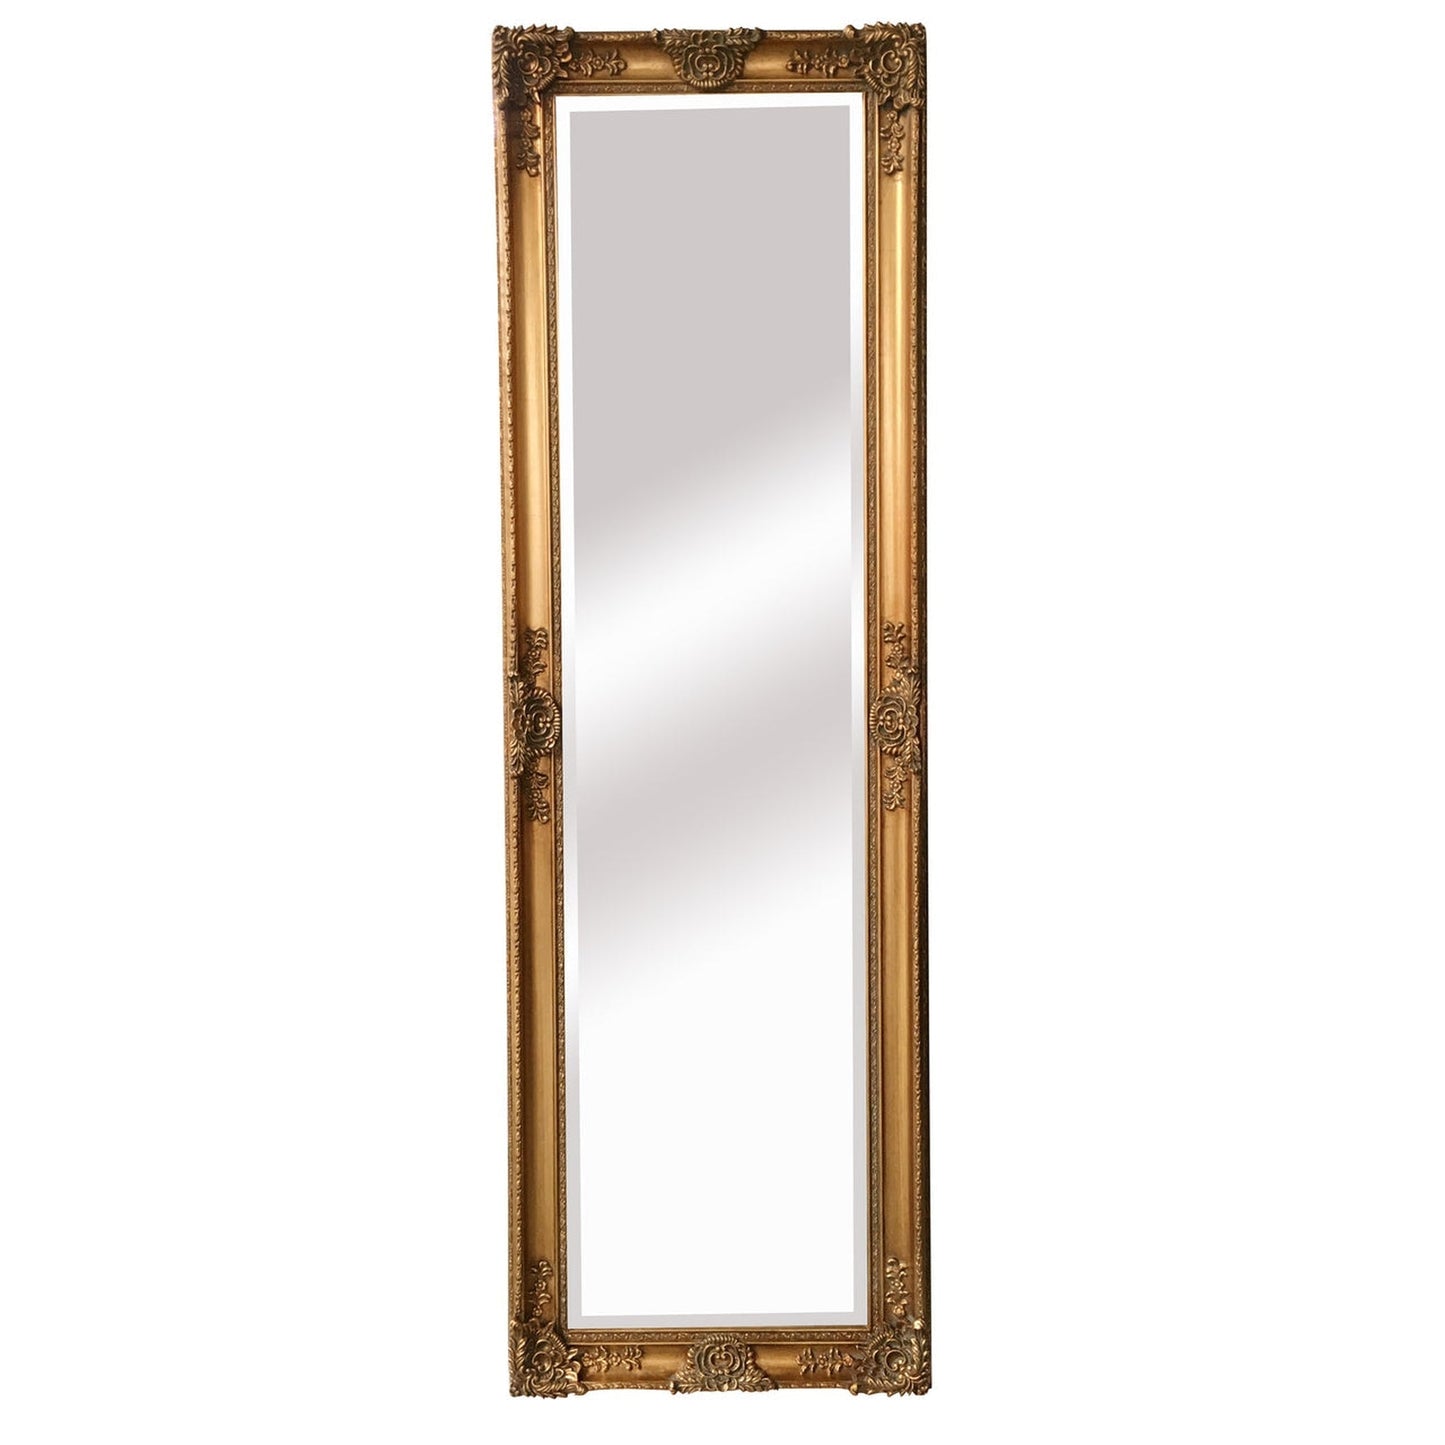 SBC Decor Mayfair Belle 19" x 60" Wall-Mounted Full Length Wood Frame Dresser Mirror In Antique Gold Finish